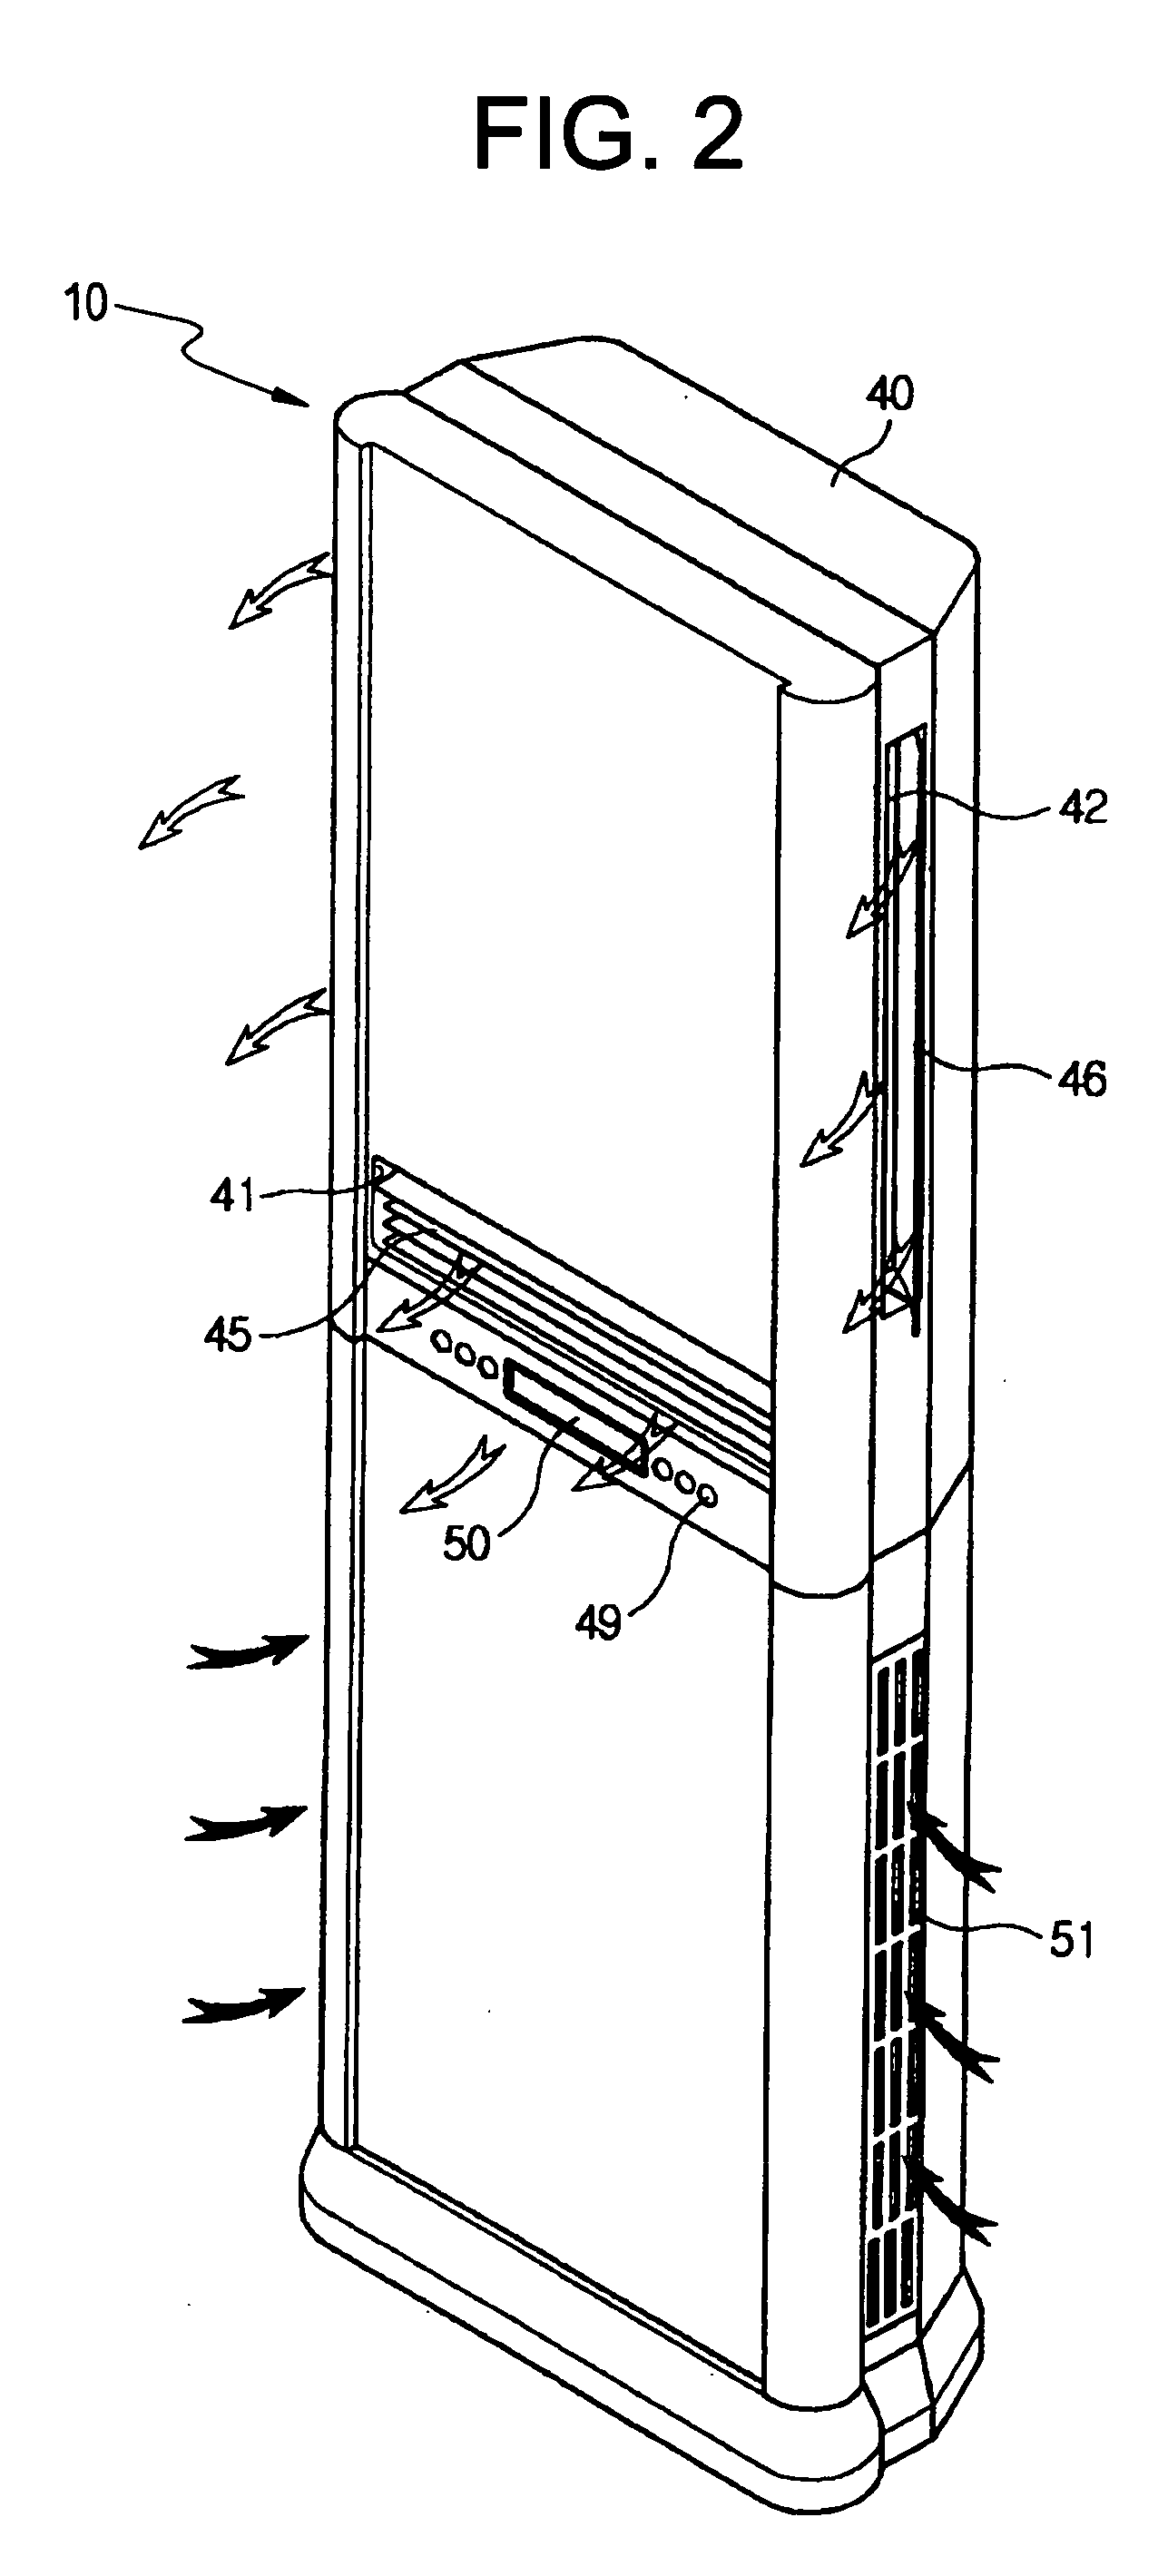 Multi-stage operation type air conditioner